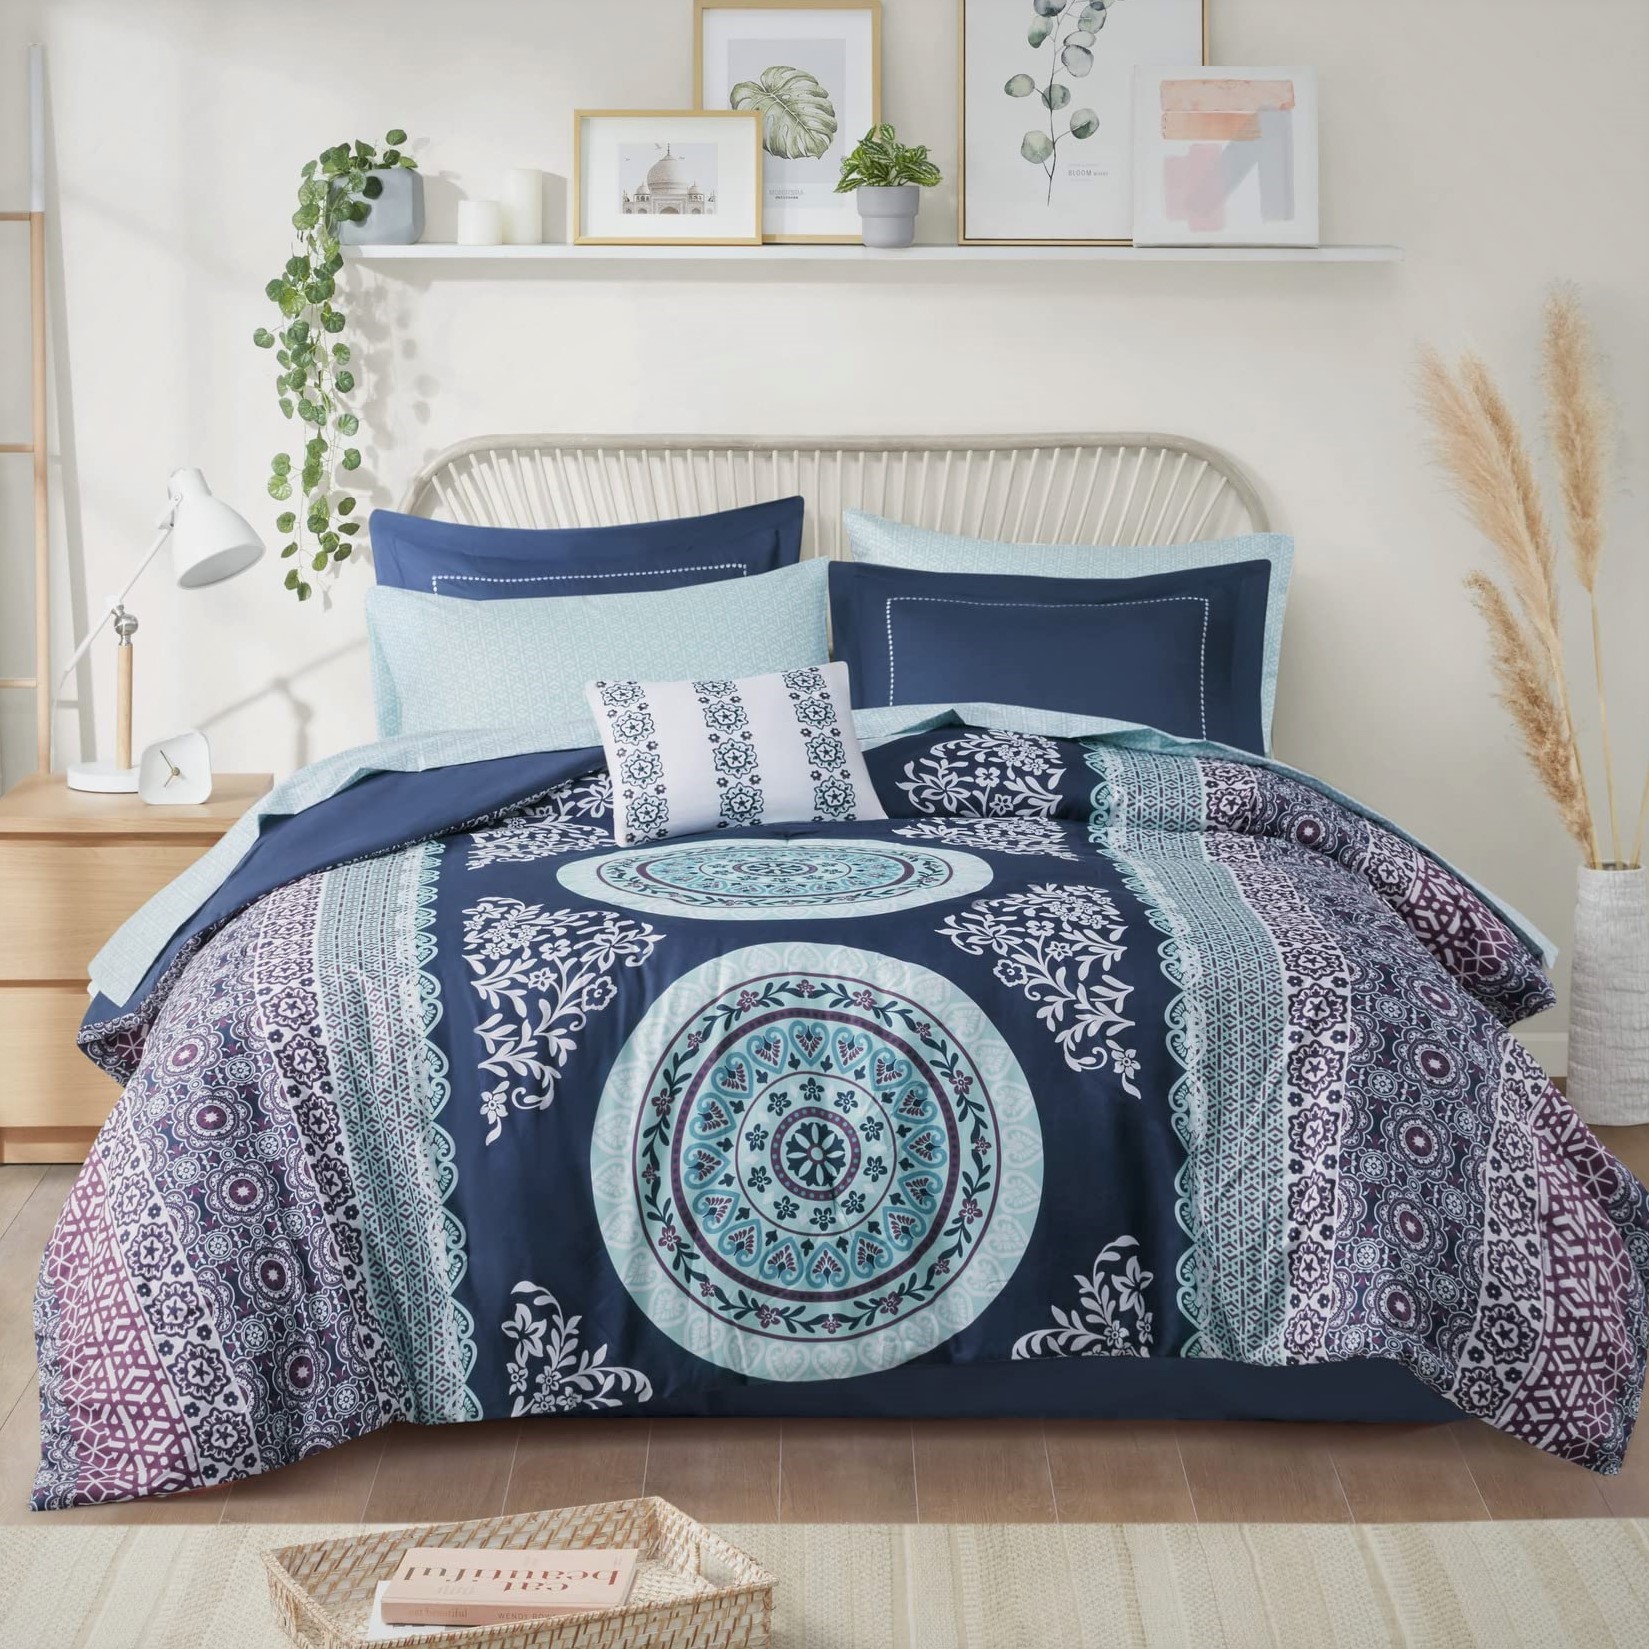 Intelligent Design 7-Piece Twin XL Comforter Sets with Sheet Bed in a Bag Navy Medallion Print Bedding Sets - image 1 of 12